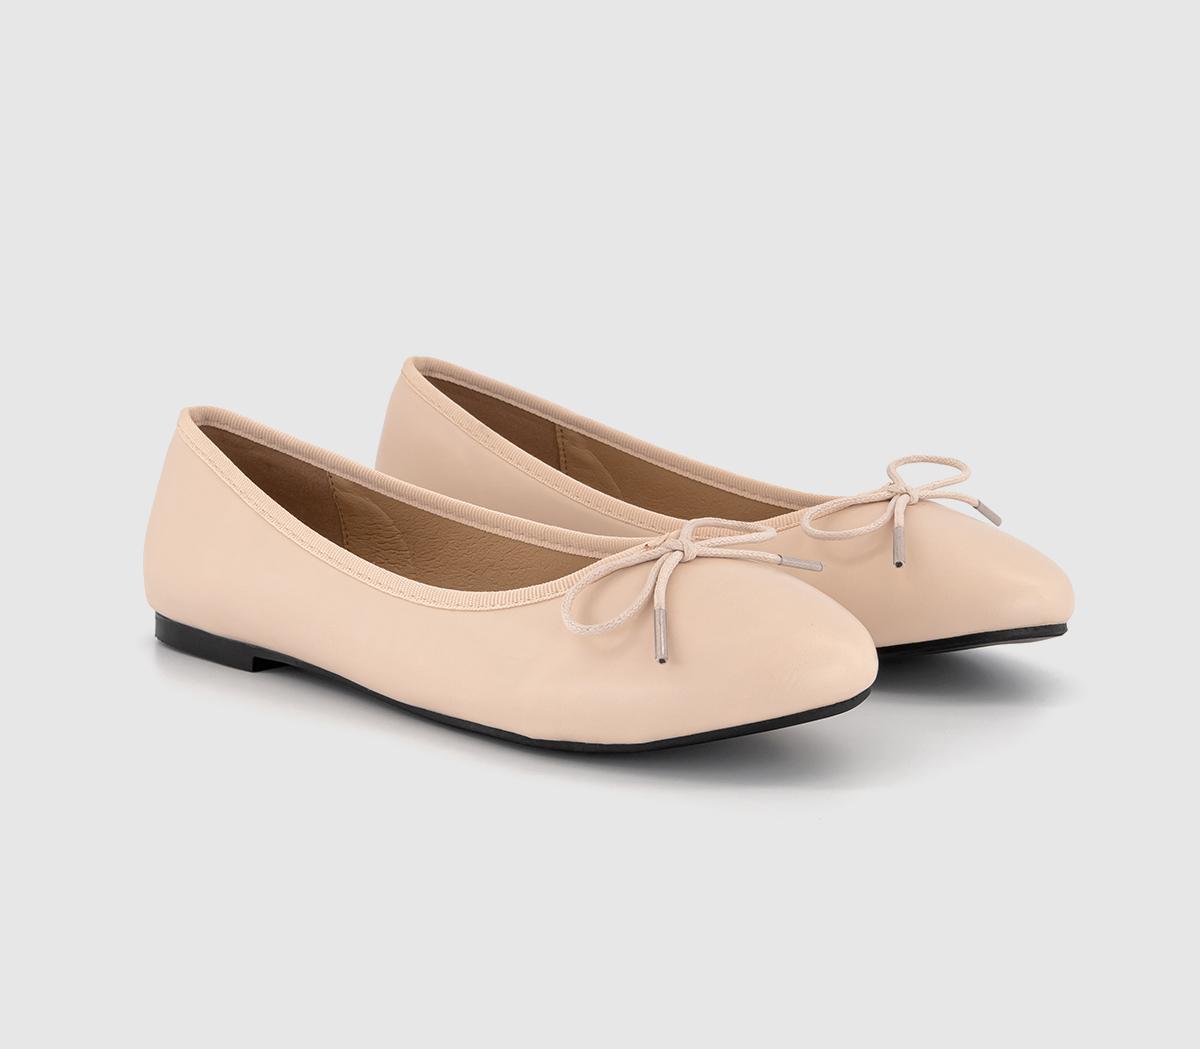 French Sole Womens Amelie Ballet Shoes Beige Leather Natural, 4